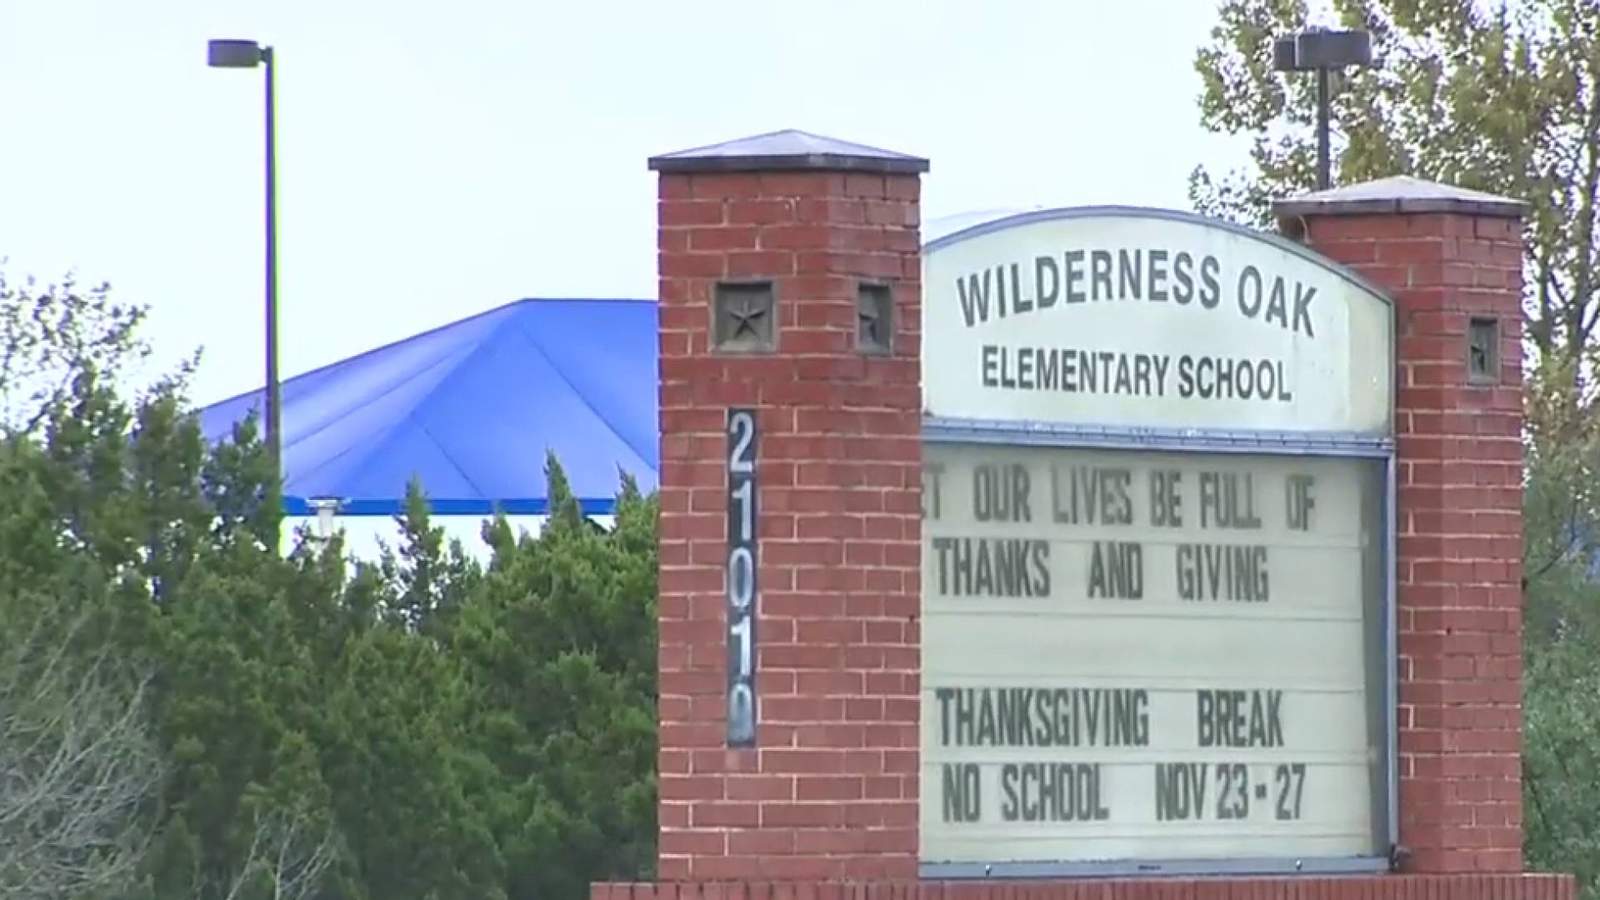 Medical Examiner IDs man found deceased after crashing truck outside Wilderness Elementary School